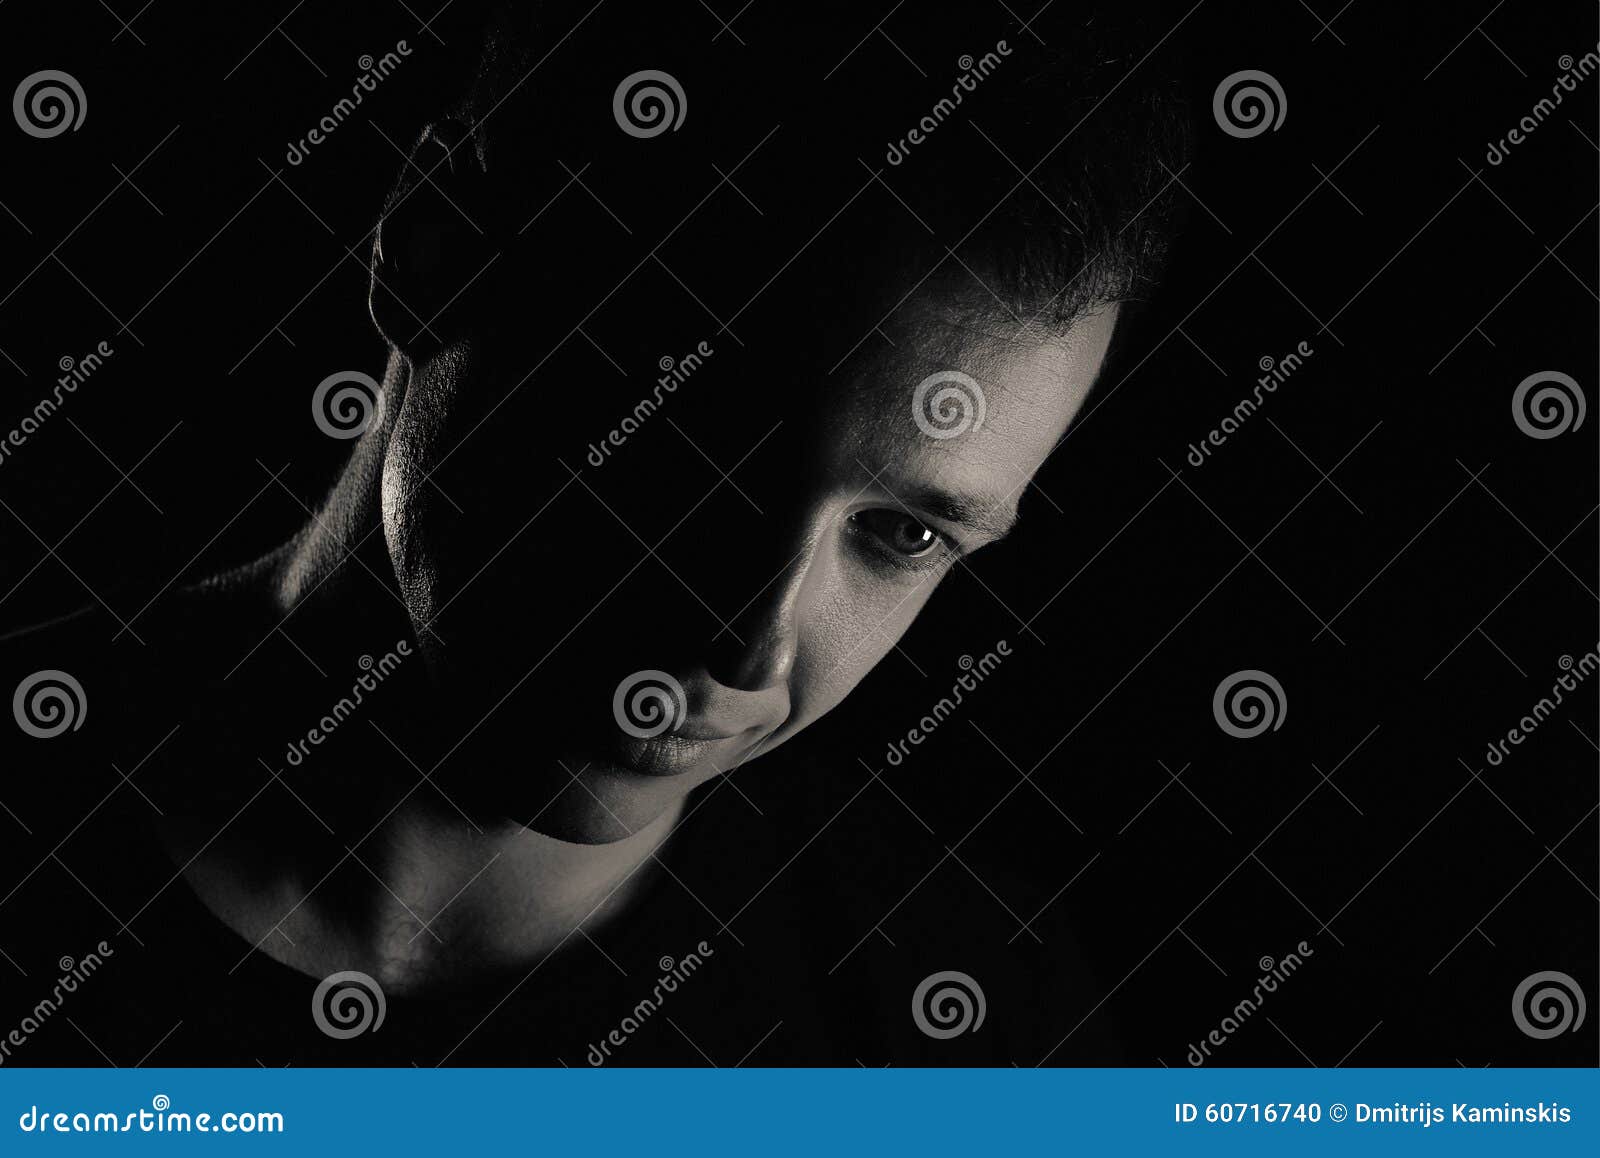 Half Face Photo of Man in Black Face Paint · Free Stock Photo